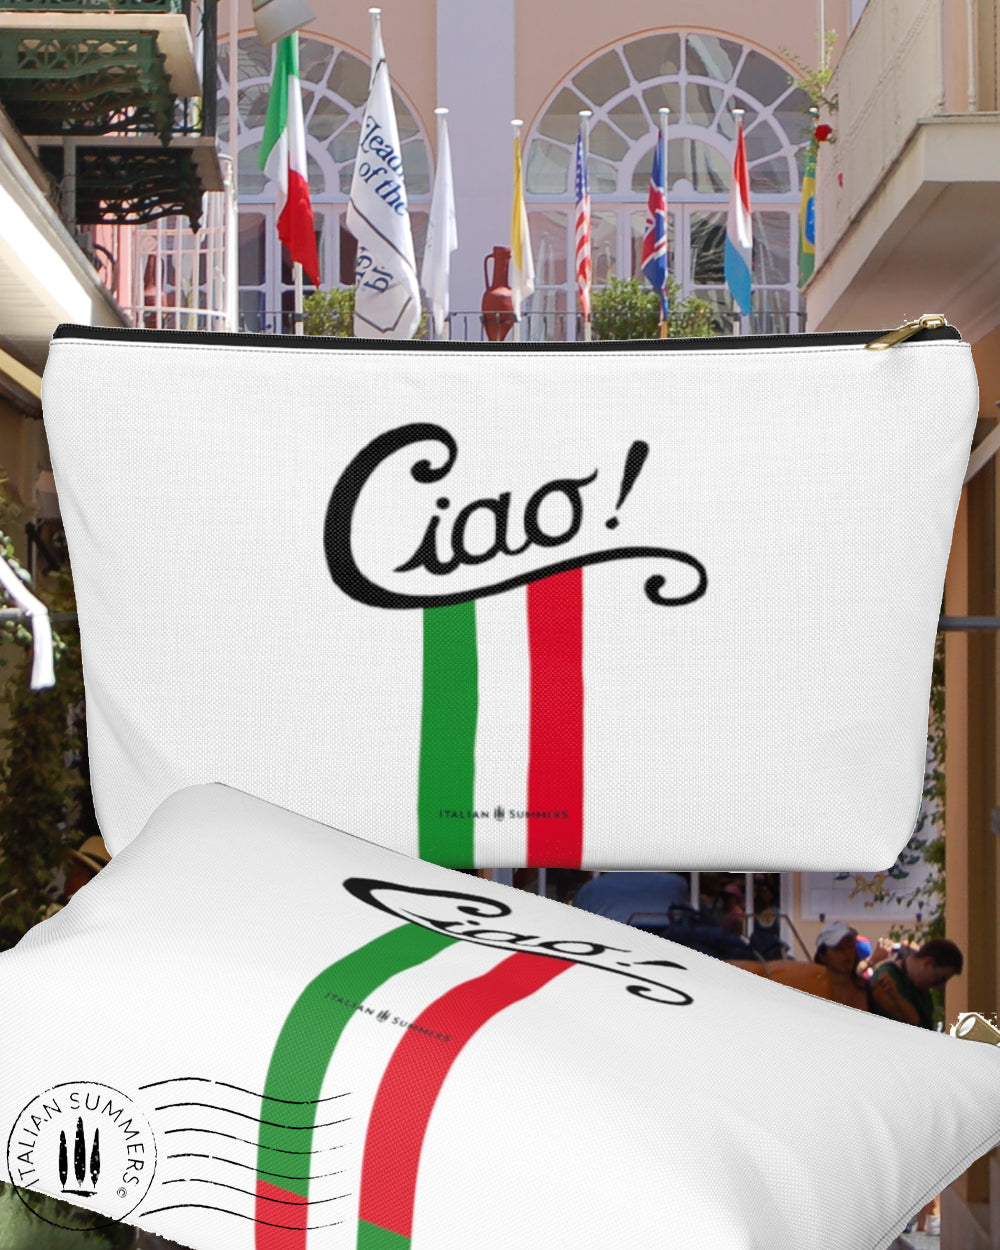 The Clutch CIAO ITALIA is a fun and stylish way to add a dash of Italian charm to any look! Crafted with vibrant stripes in the colors of the Italian flag, it's sure to spread some amore everywhere you go! And with the word "Ciao!" across the front